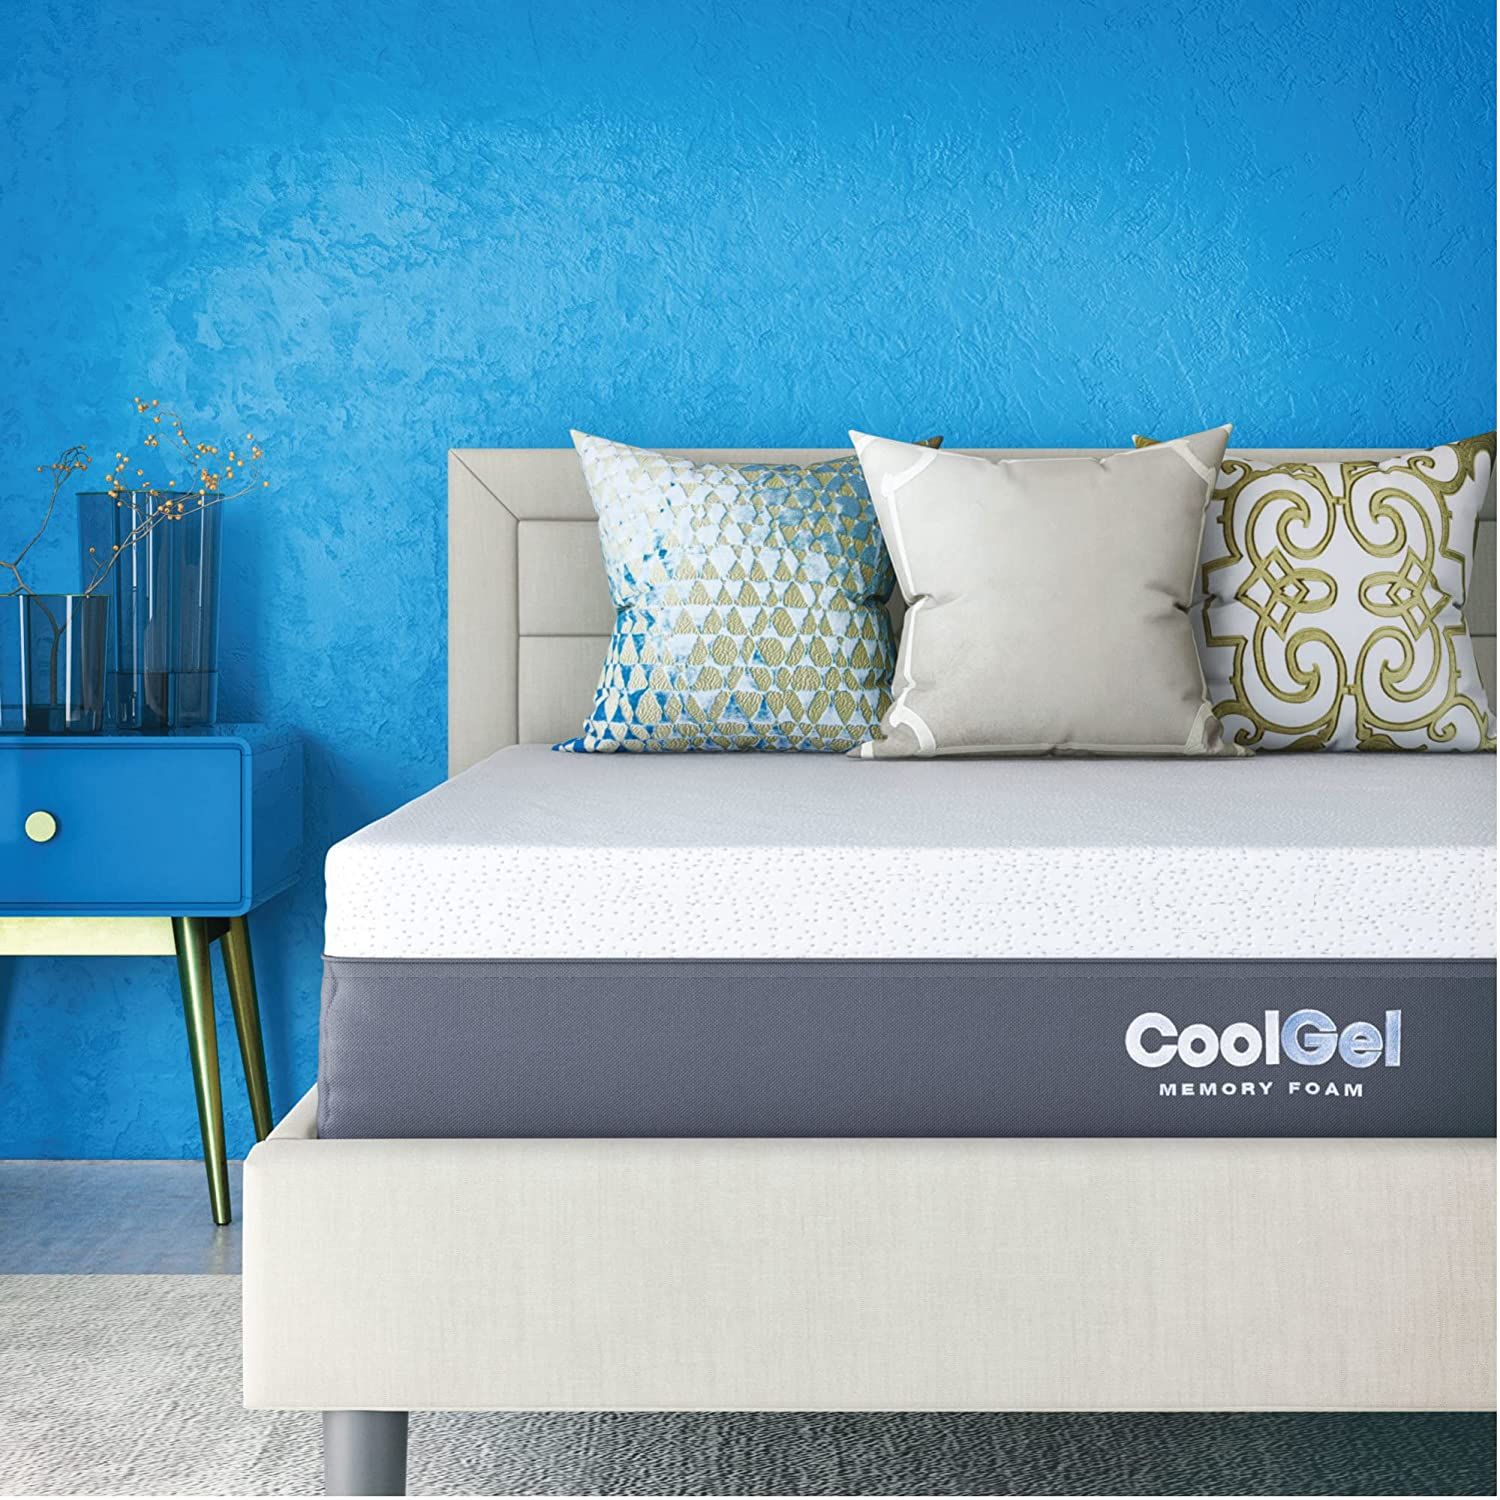 10 Best Cooling Mattresses of 2022 — ReviewThis